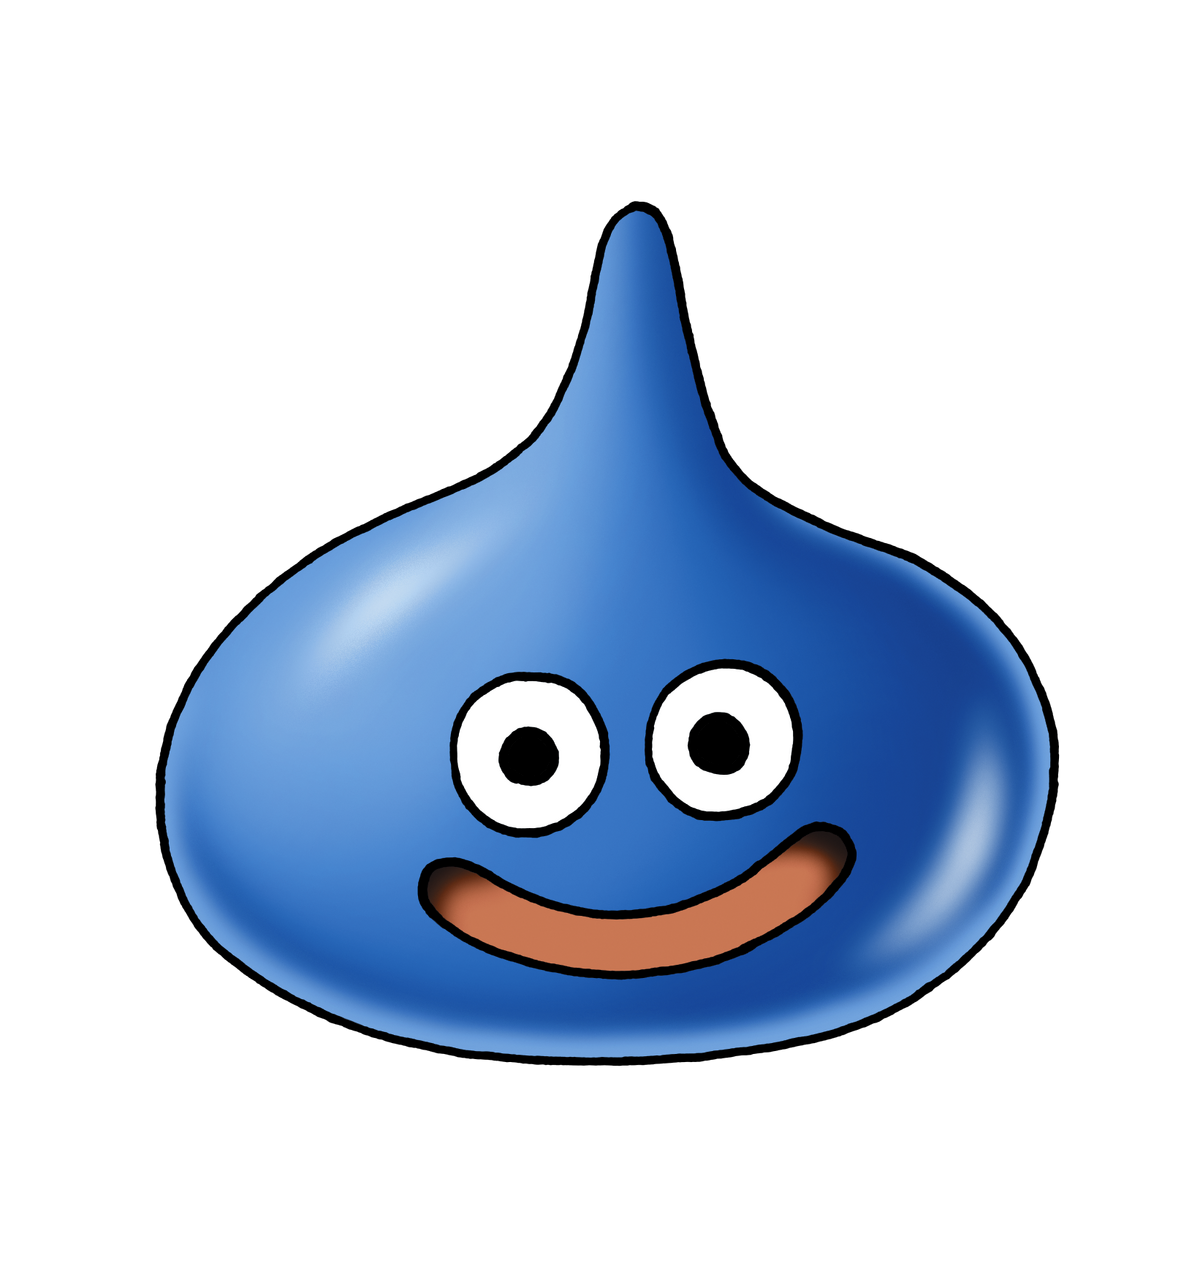 Product N°12, Dragon Quest Wiki